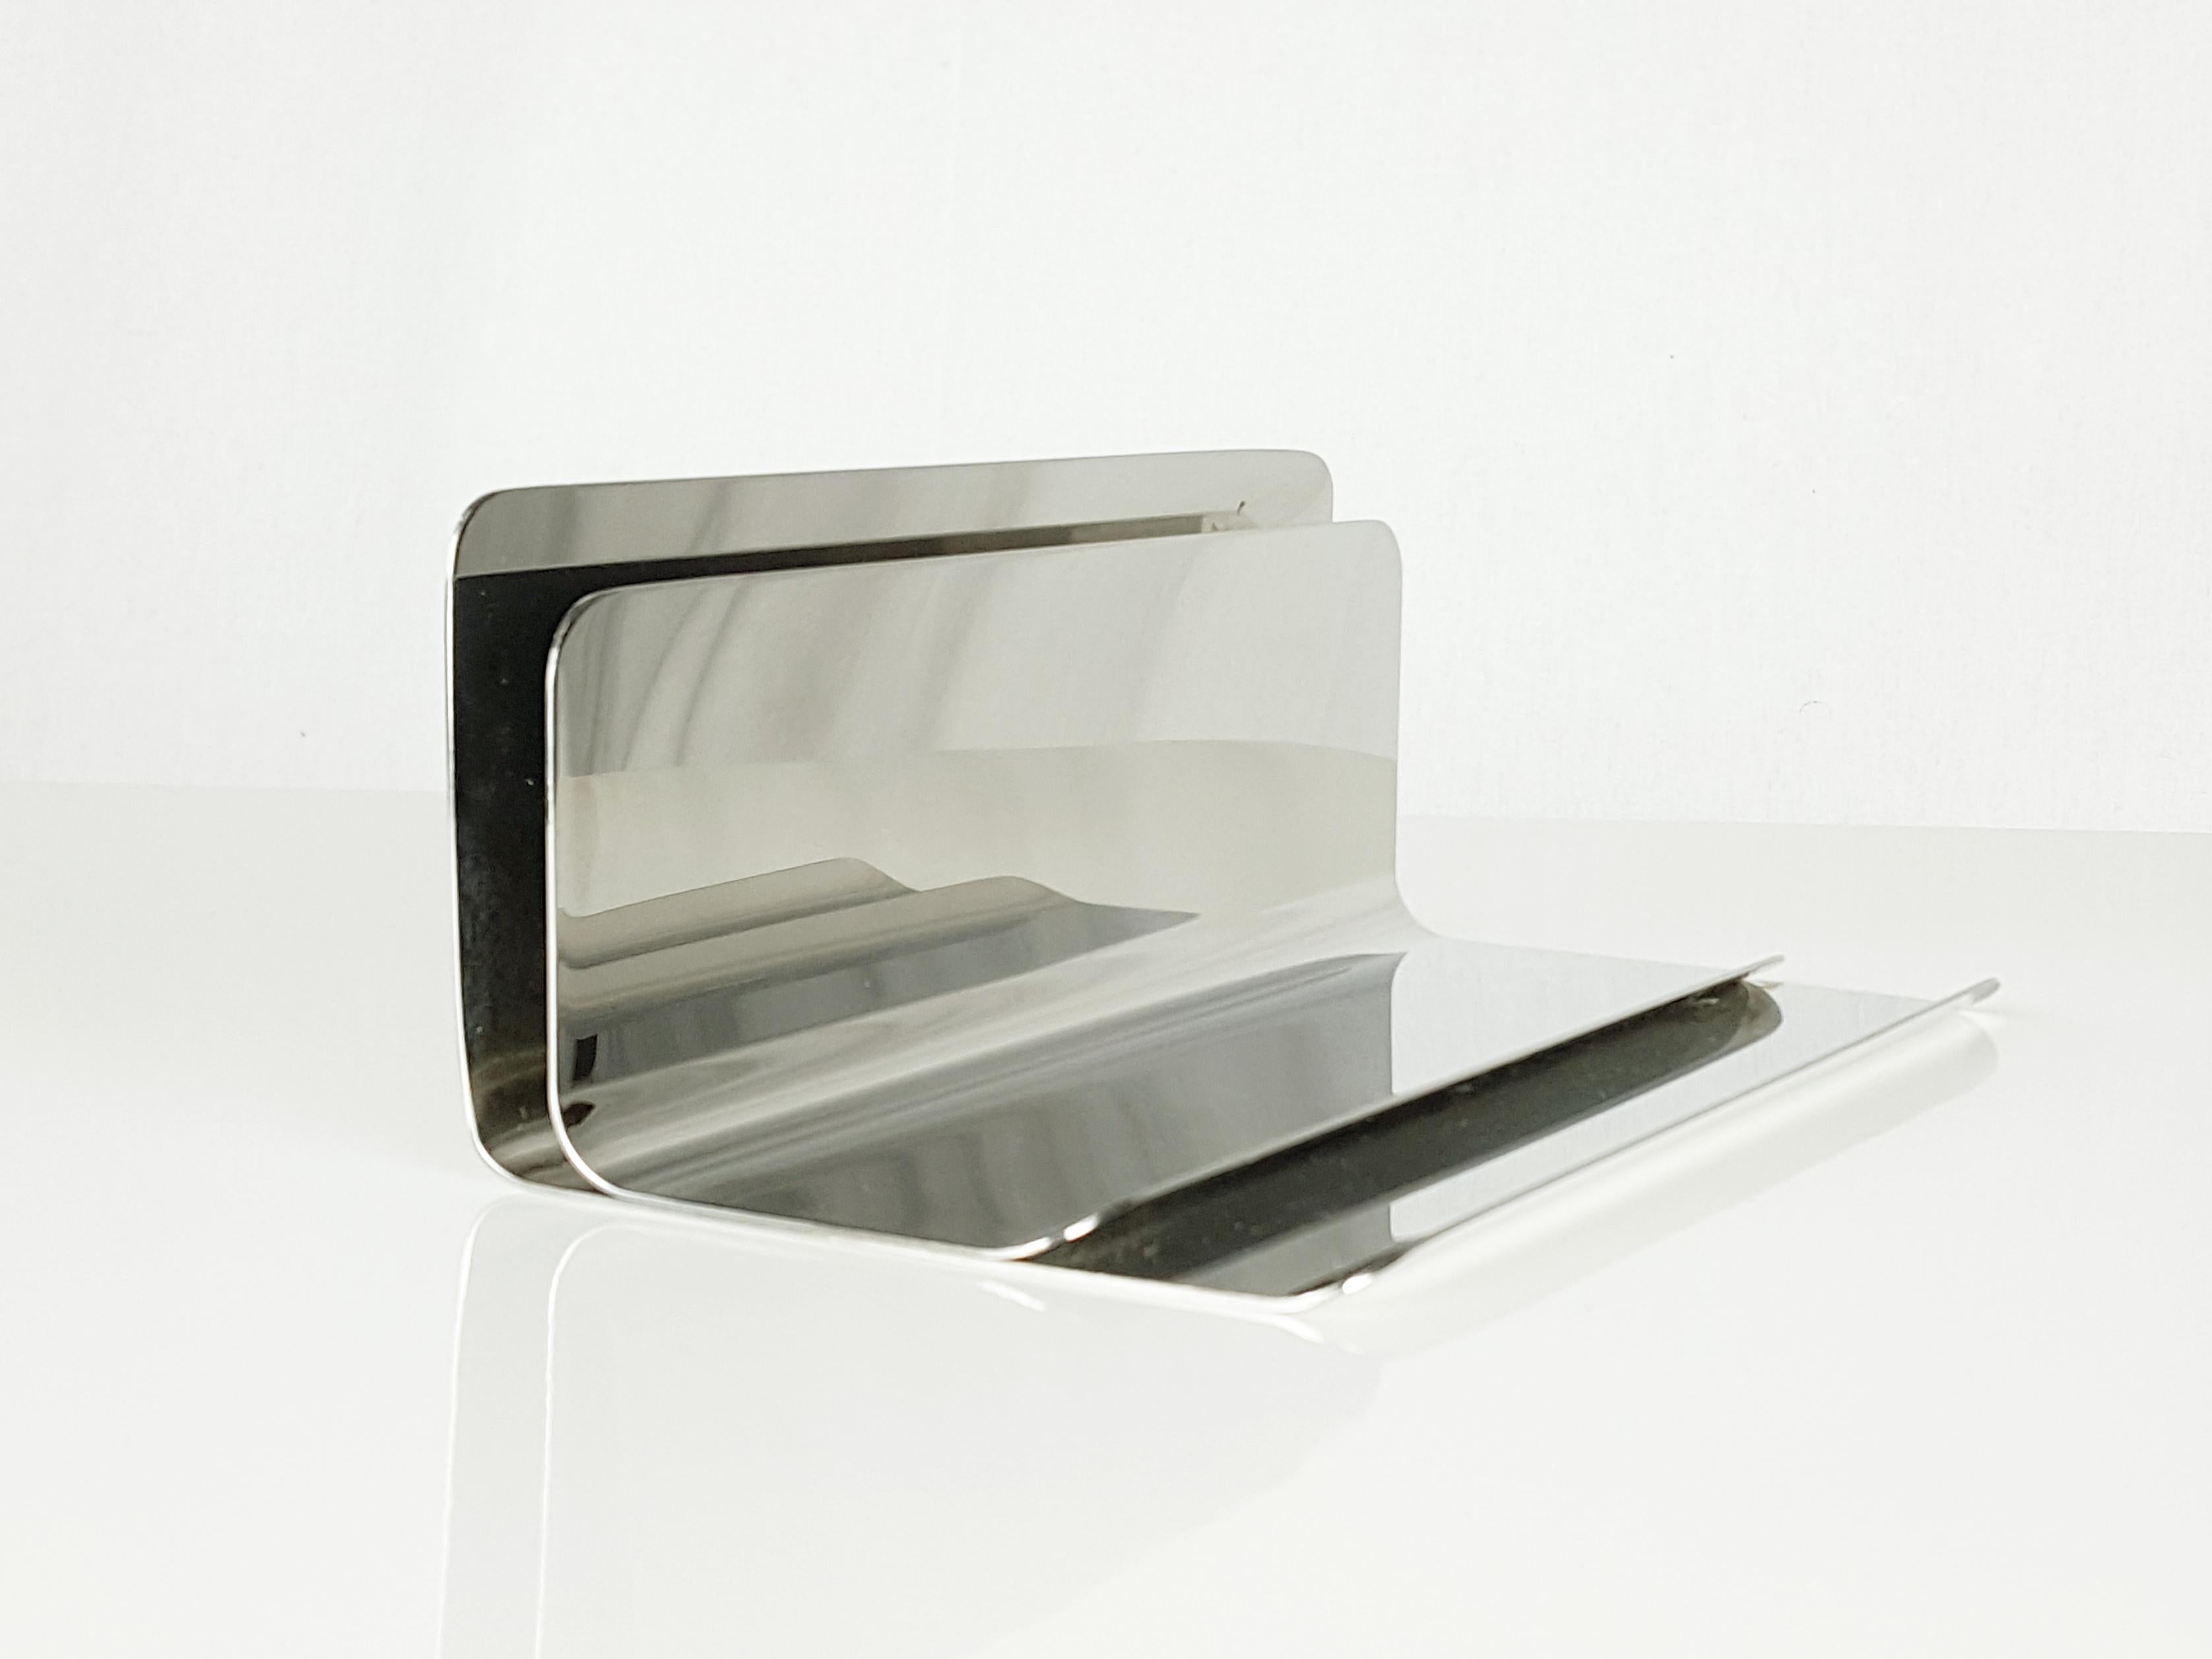 Ventotene desk organizer, model 3054A in polished steel designed by Enzo Mari for Danese Milano in 1964.
Good condition: this is a vintage item, not a brand new product. Signs of wear consistent with age and use; light scratches beneath the